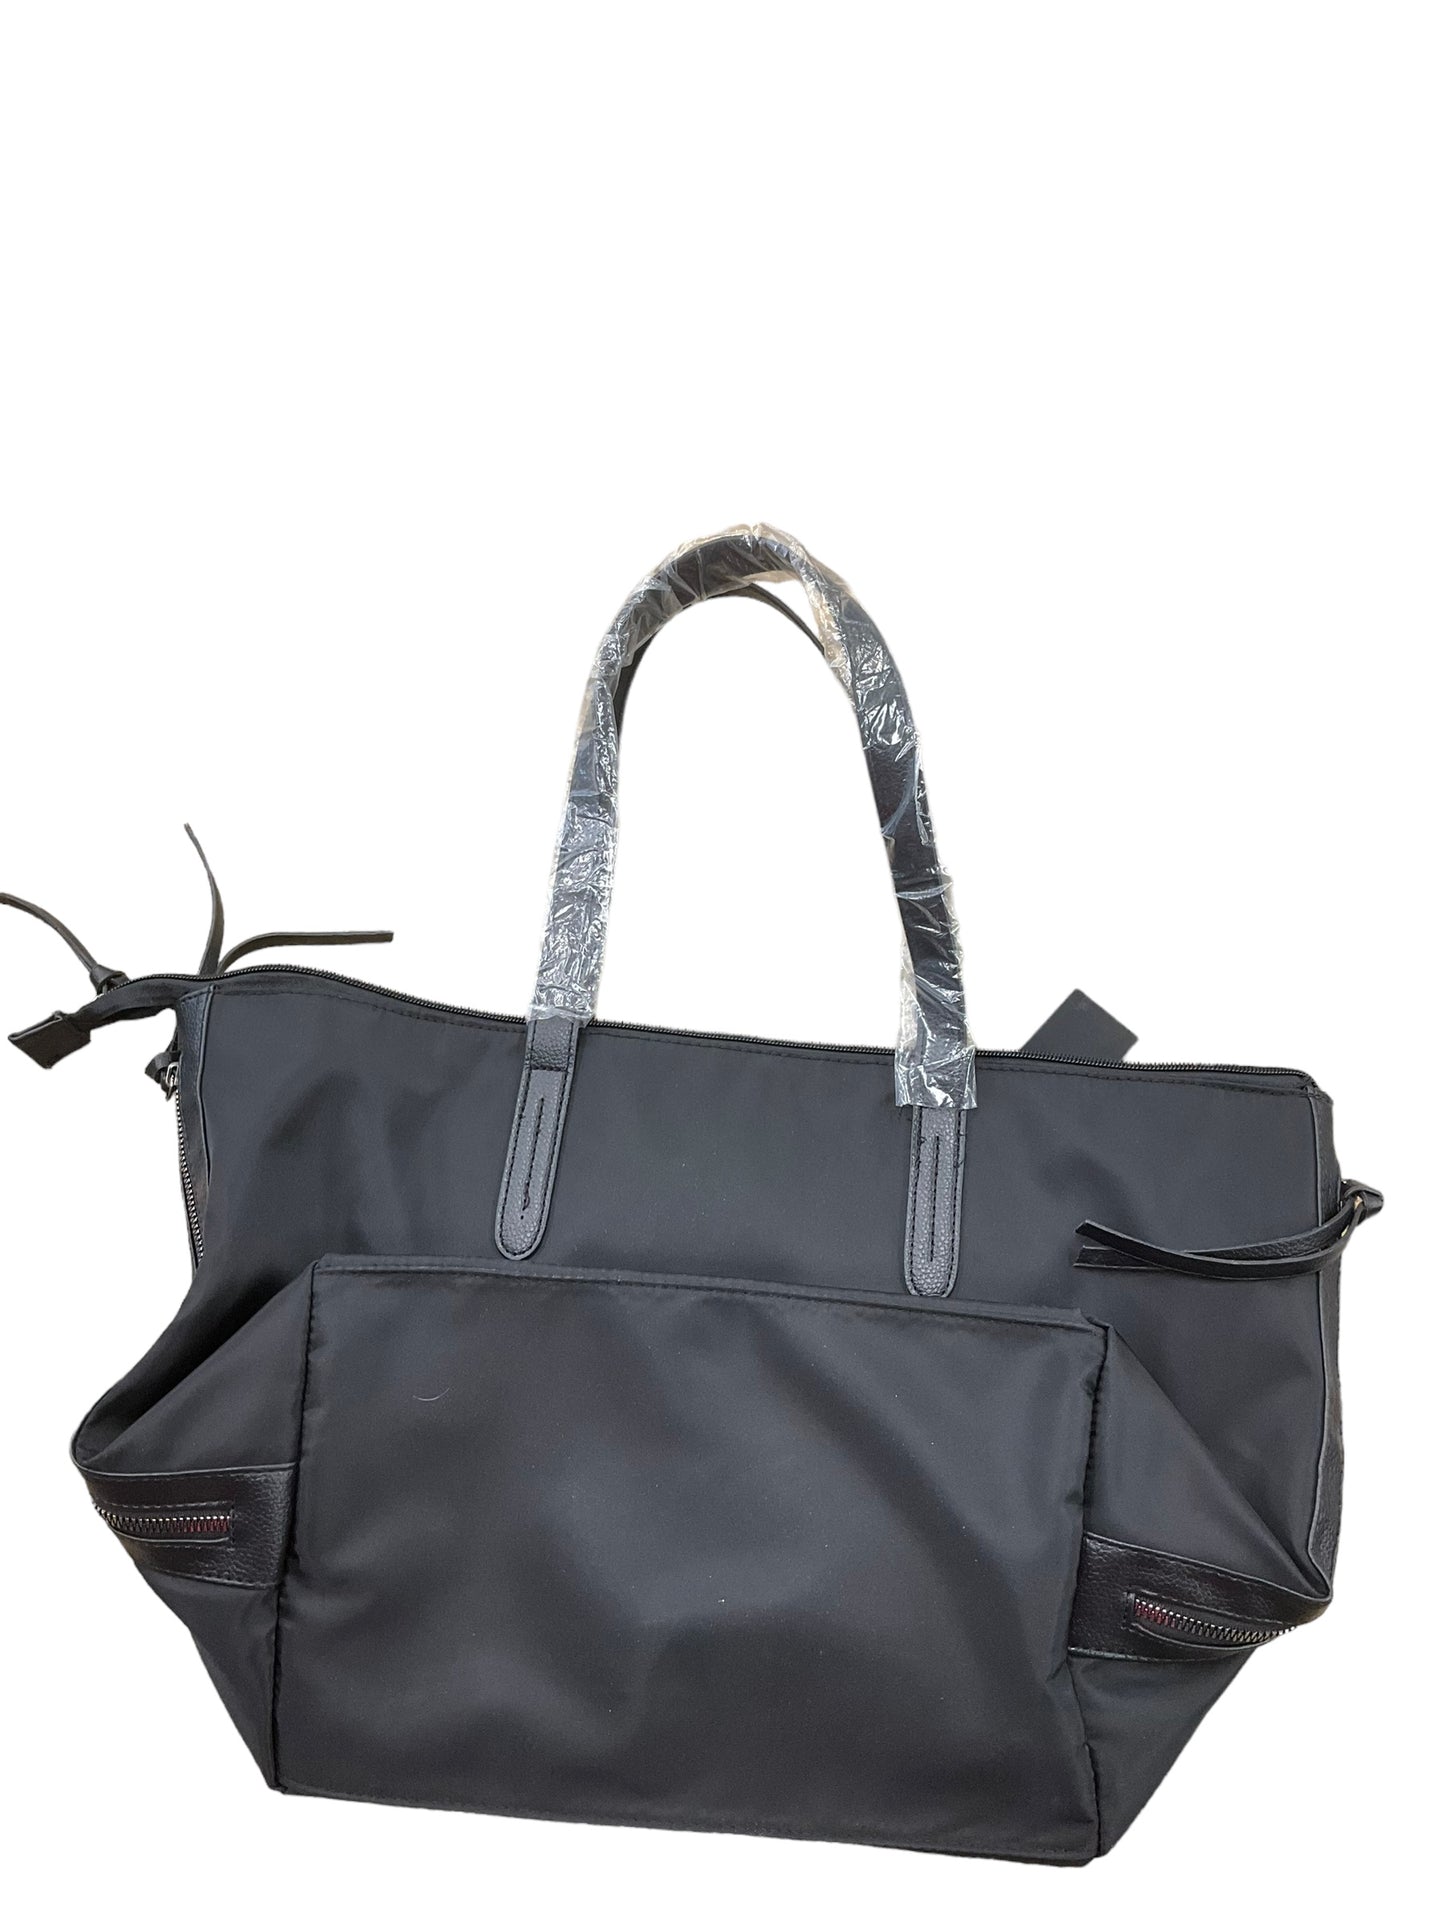 Tote By Botkier  Size: Large